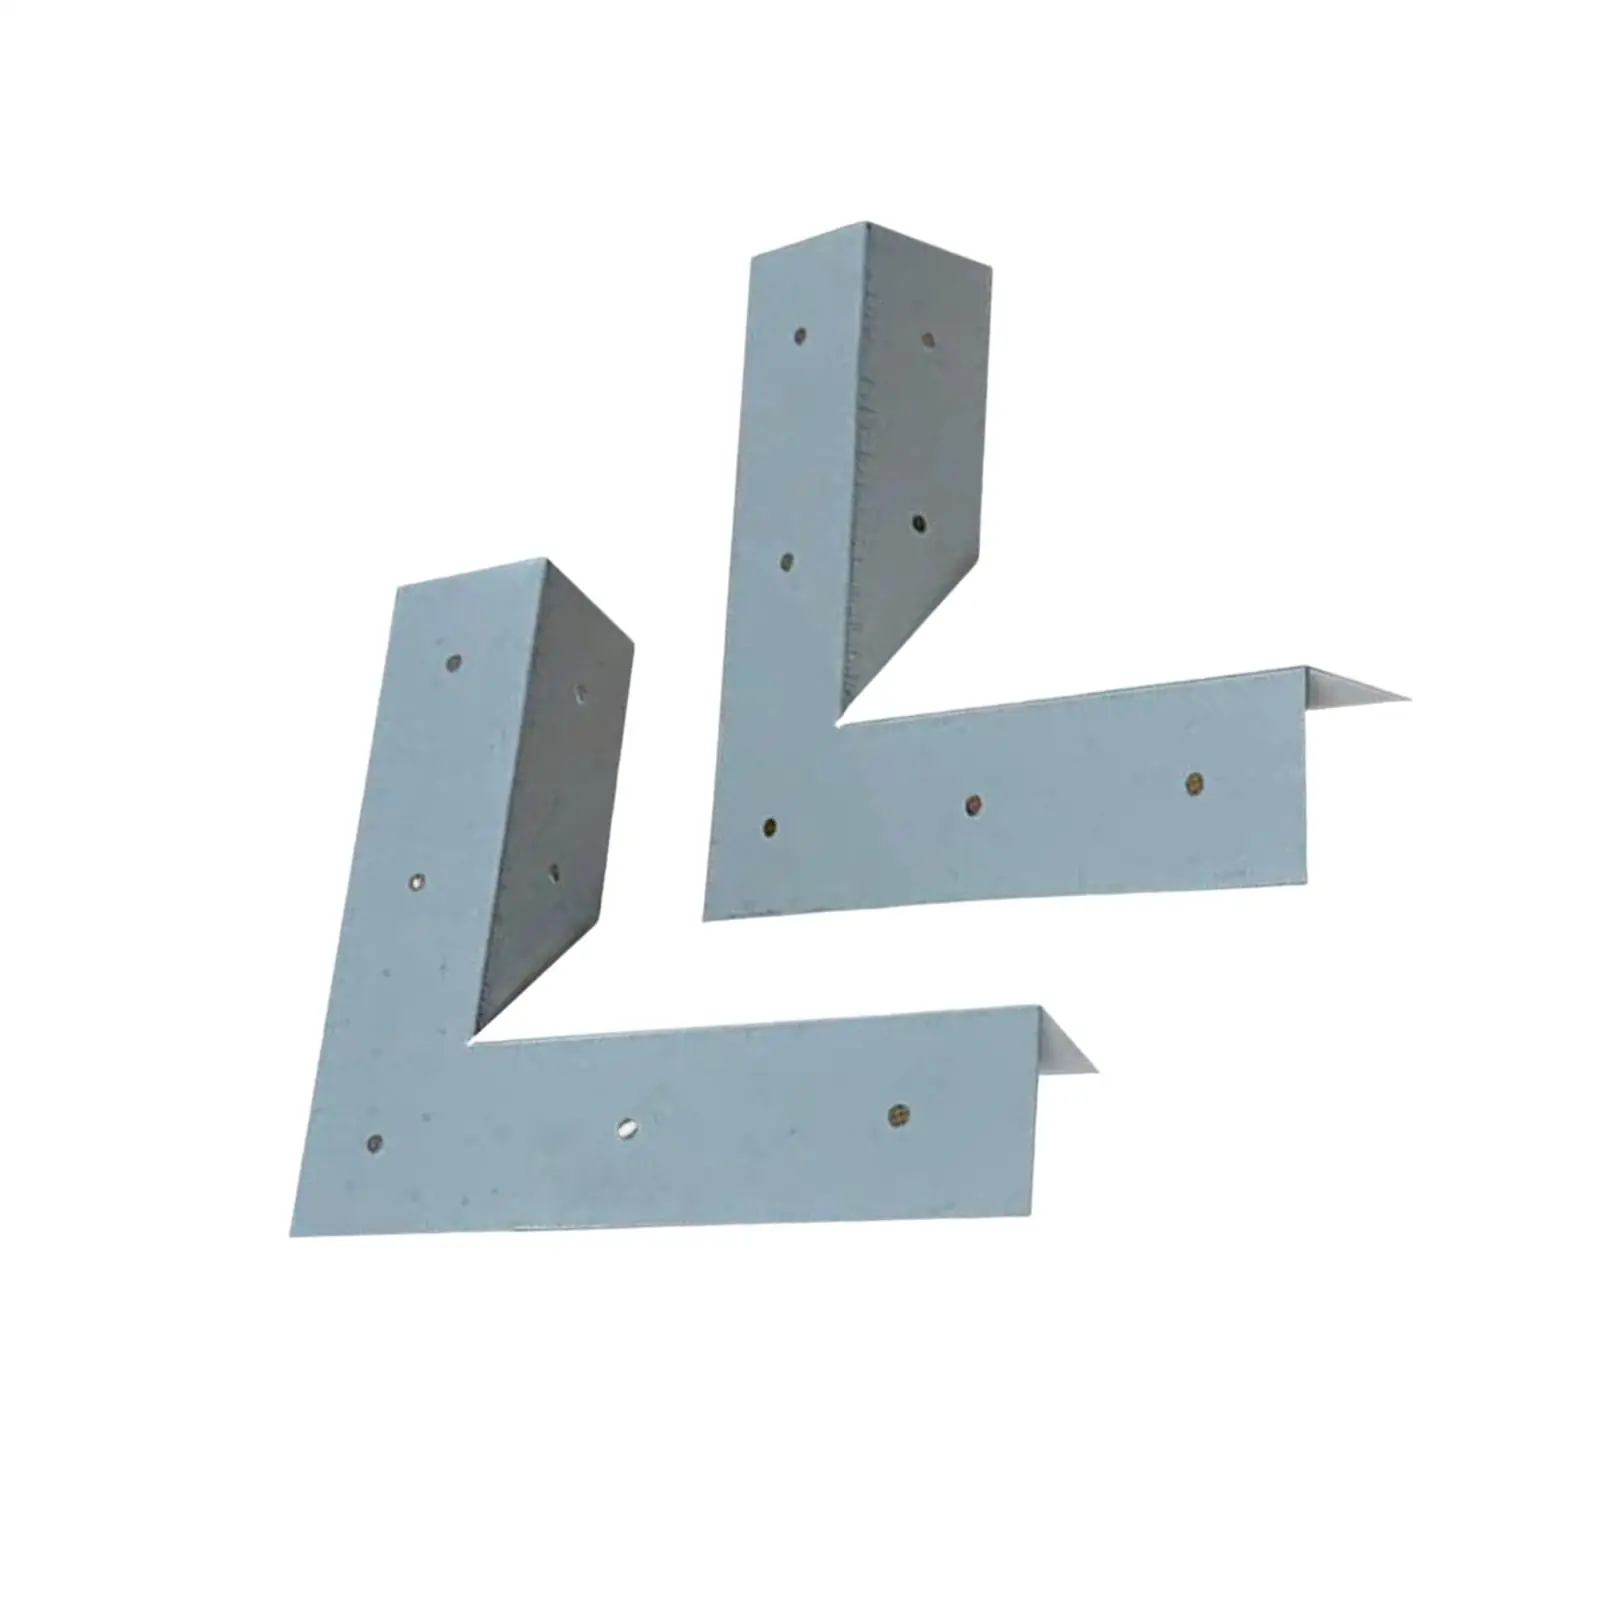 2 Pieces Angles Fixing hardware Furniture Repair Fittings Joint Fasteners Corner Reinforcement Brackets for Cupboard Wall Racks